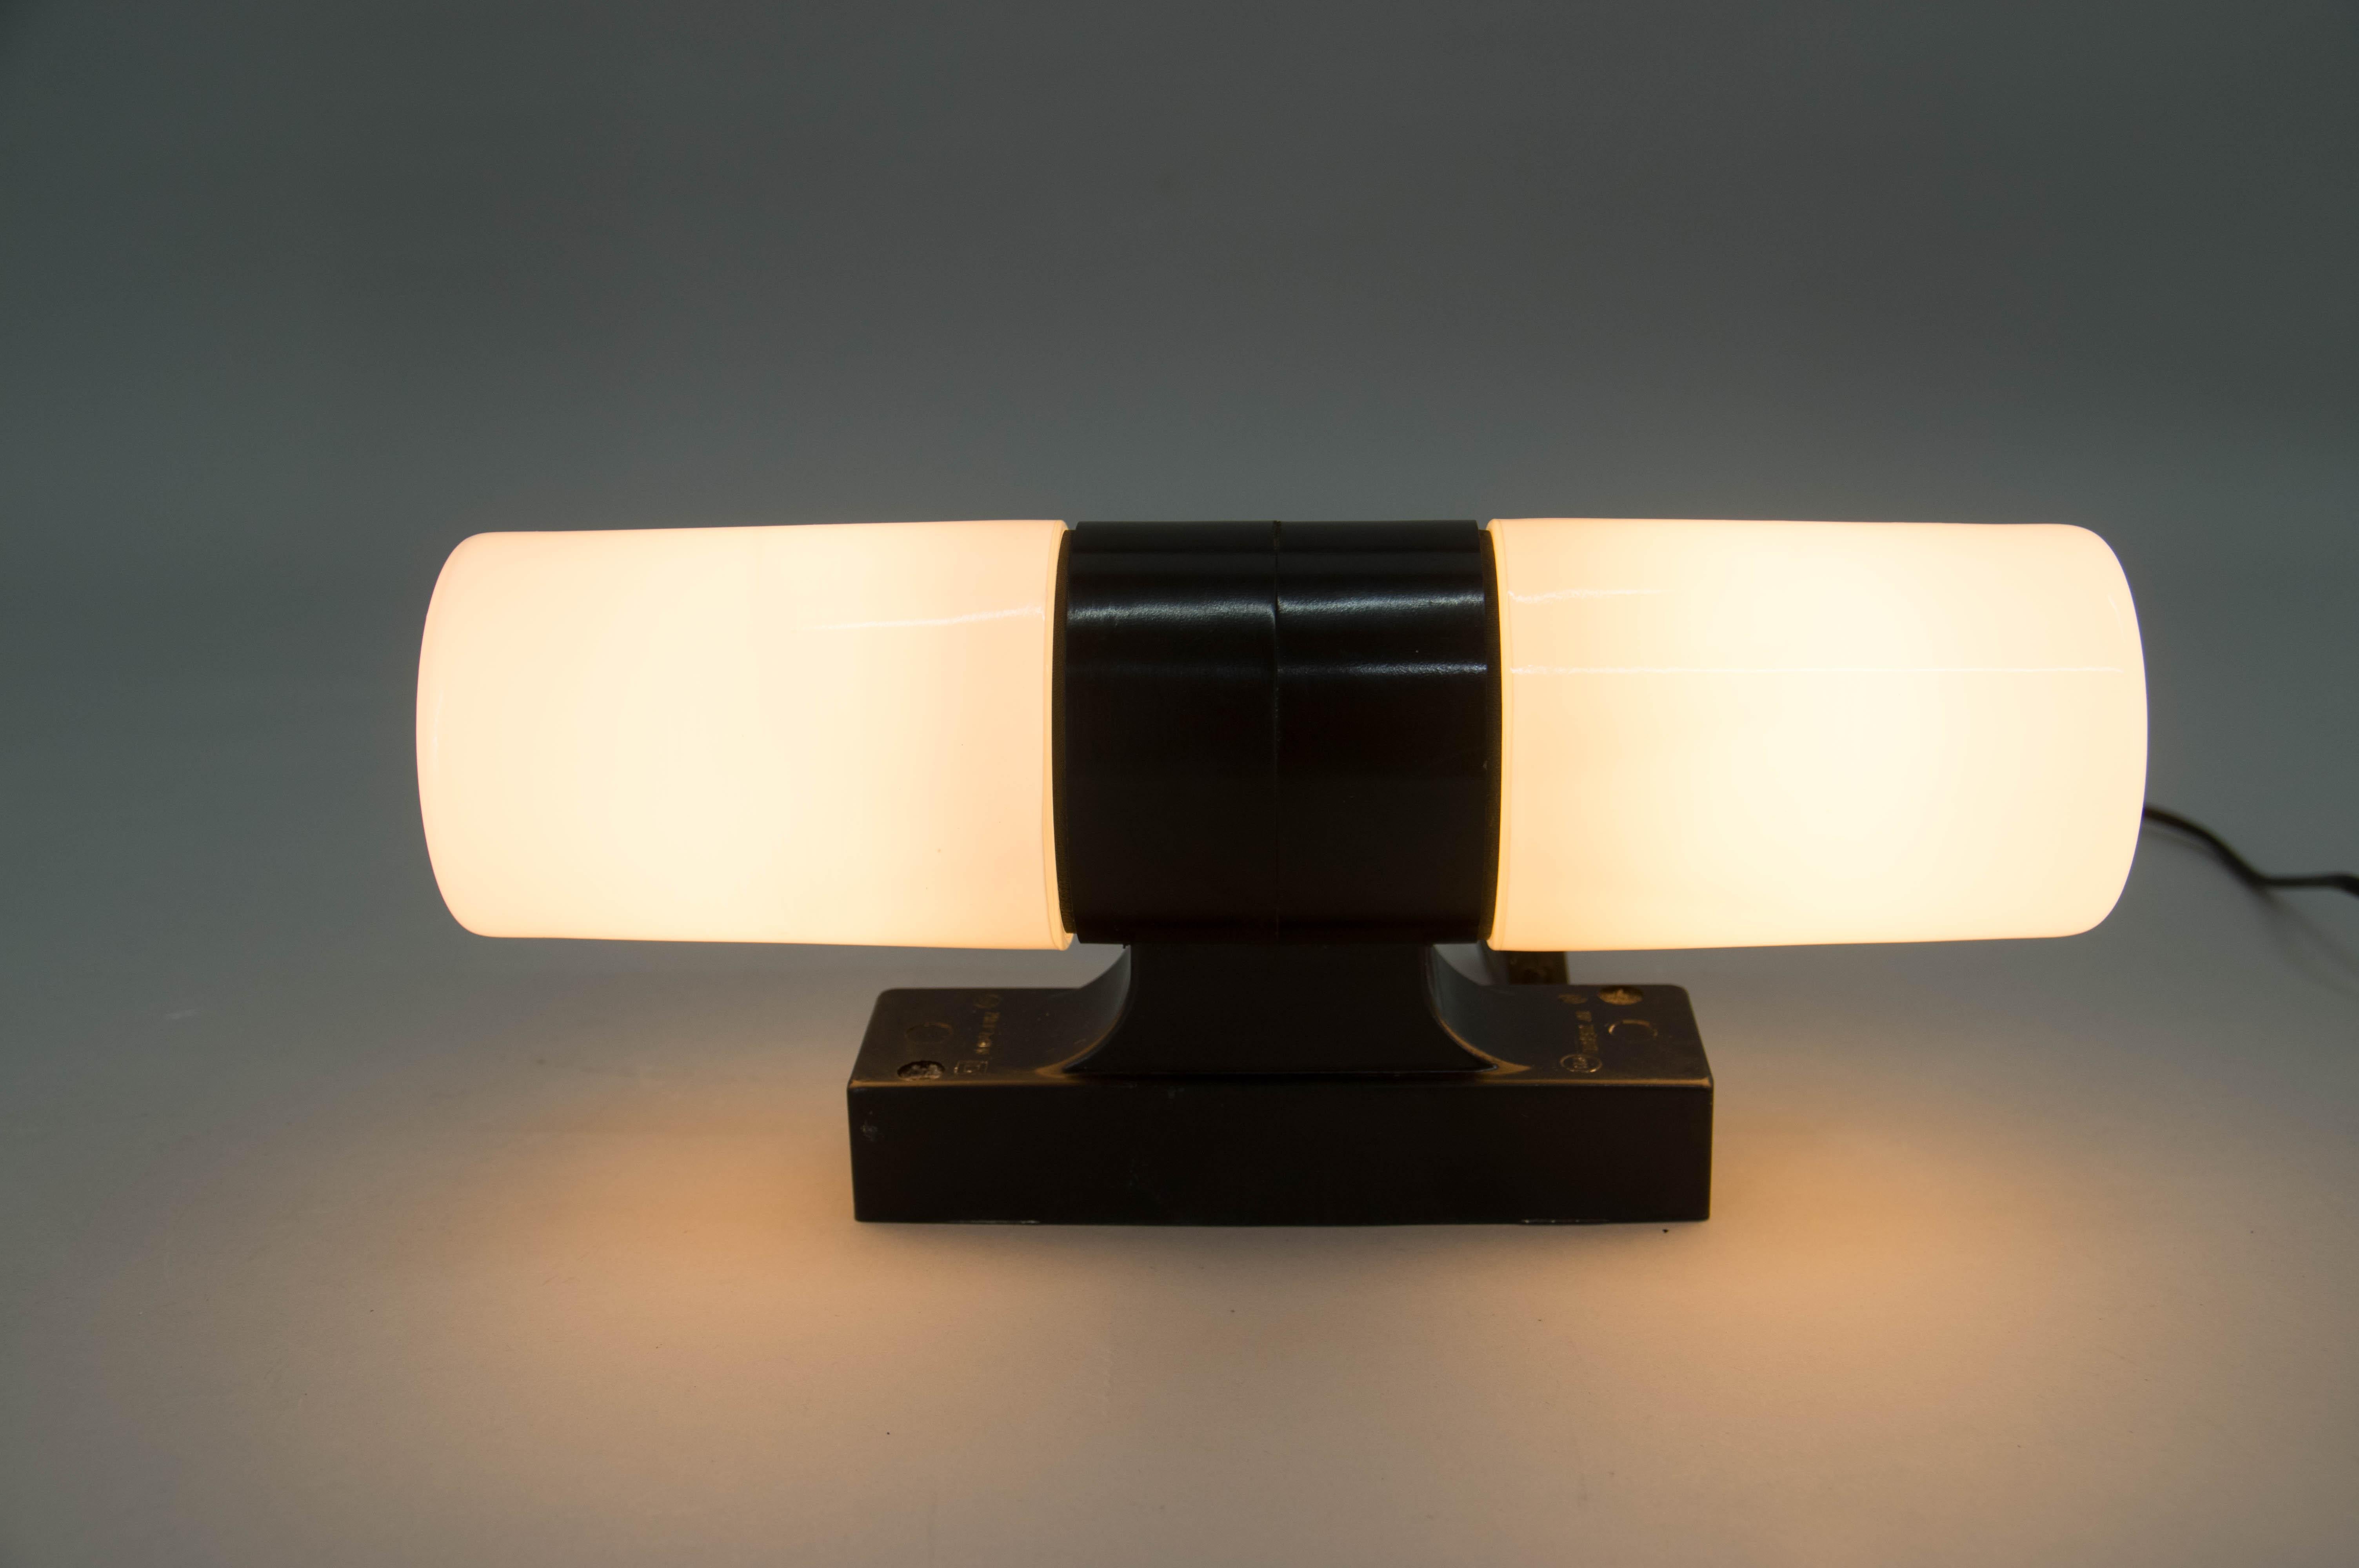 Designed in the 1950s in former Czechoslovakia as bathroom light above a mirror. Bakelite holders and opal glass shades. Seal rubber against moisture. Bulbs E14-E15, 2x40W US compatible cable.